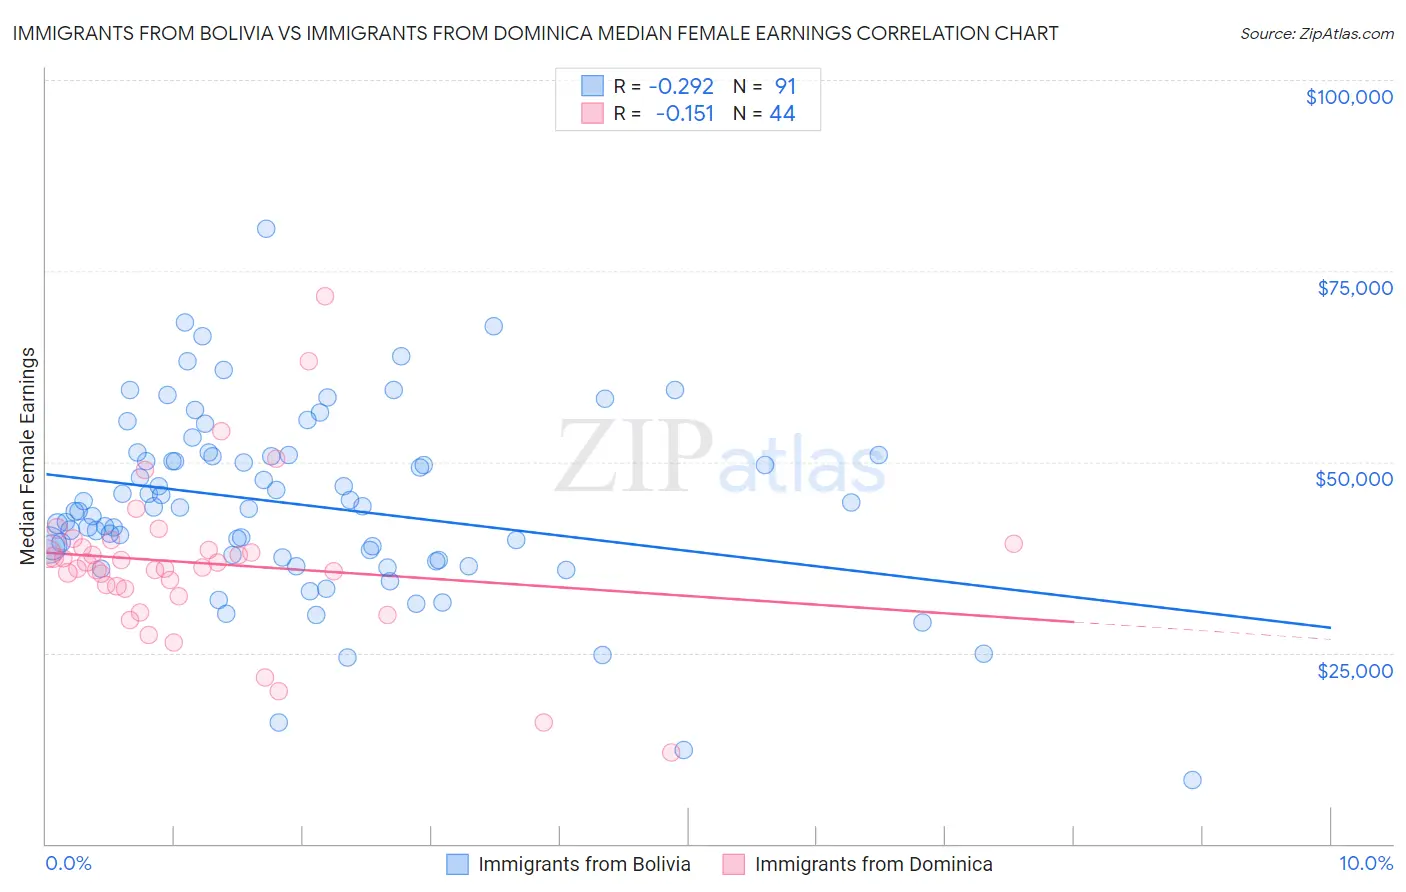 Immigrants from Bolivia vs Immigrants from Dominica Median Female Earnings